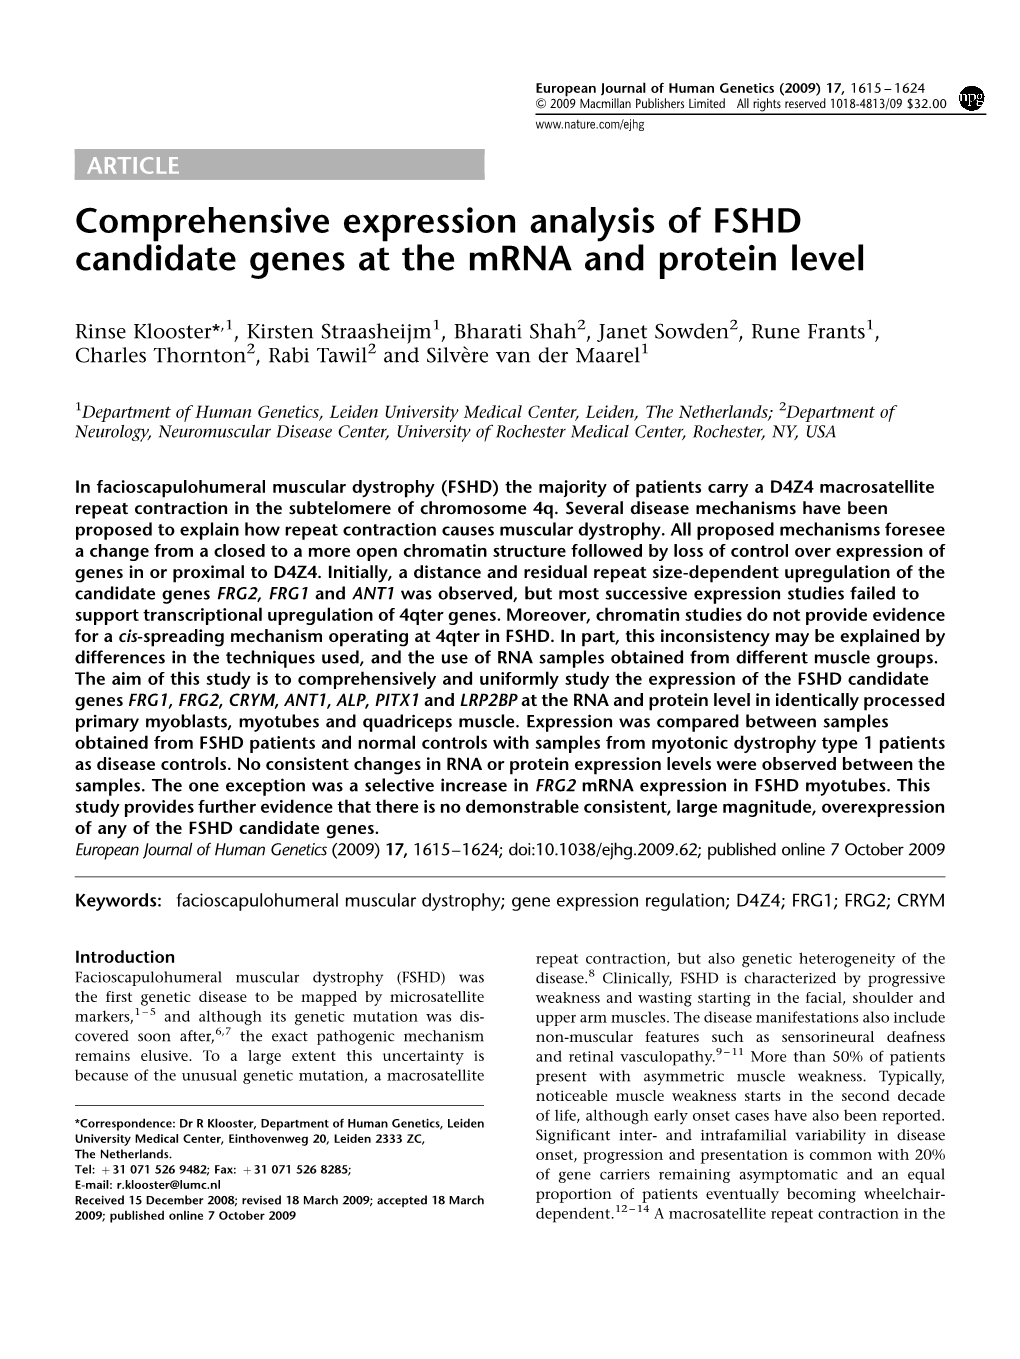 Comprehensive Expression Analysis of FSHD Candidate Genes at the Mrna and Protein Level